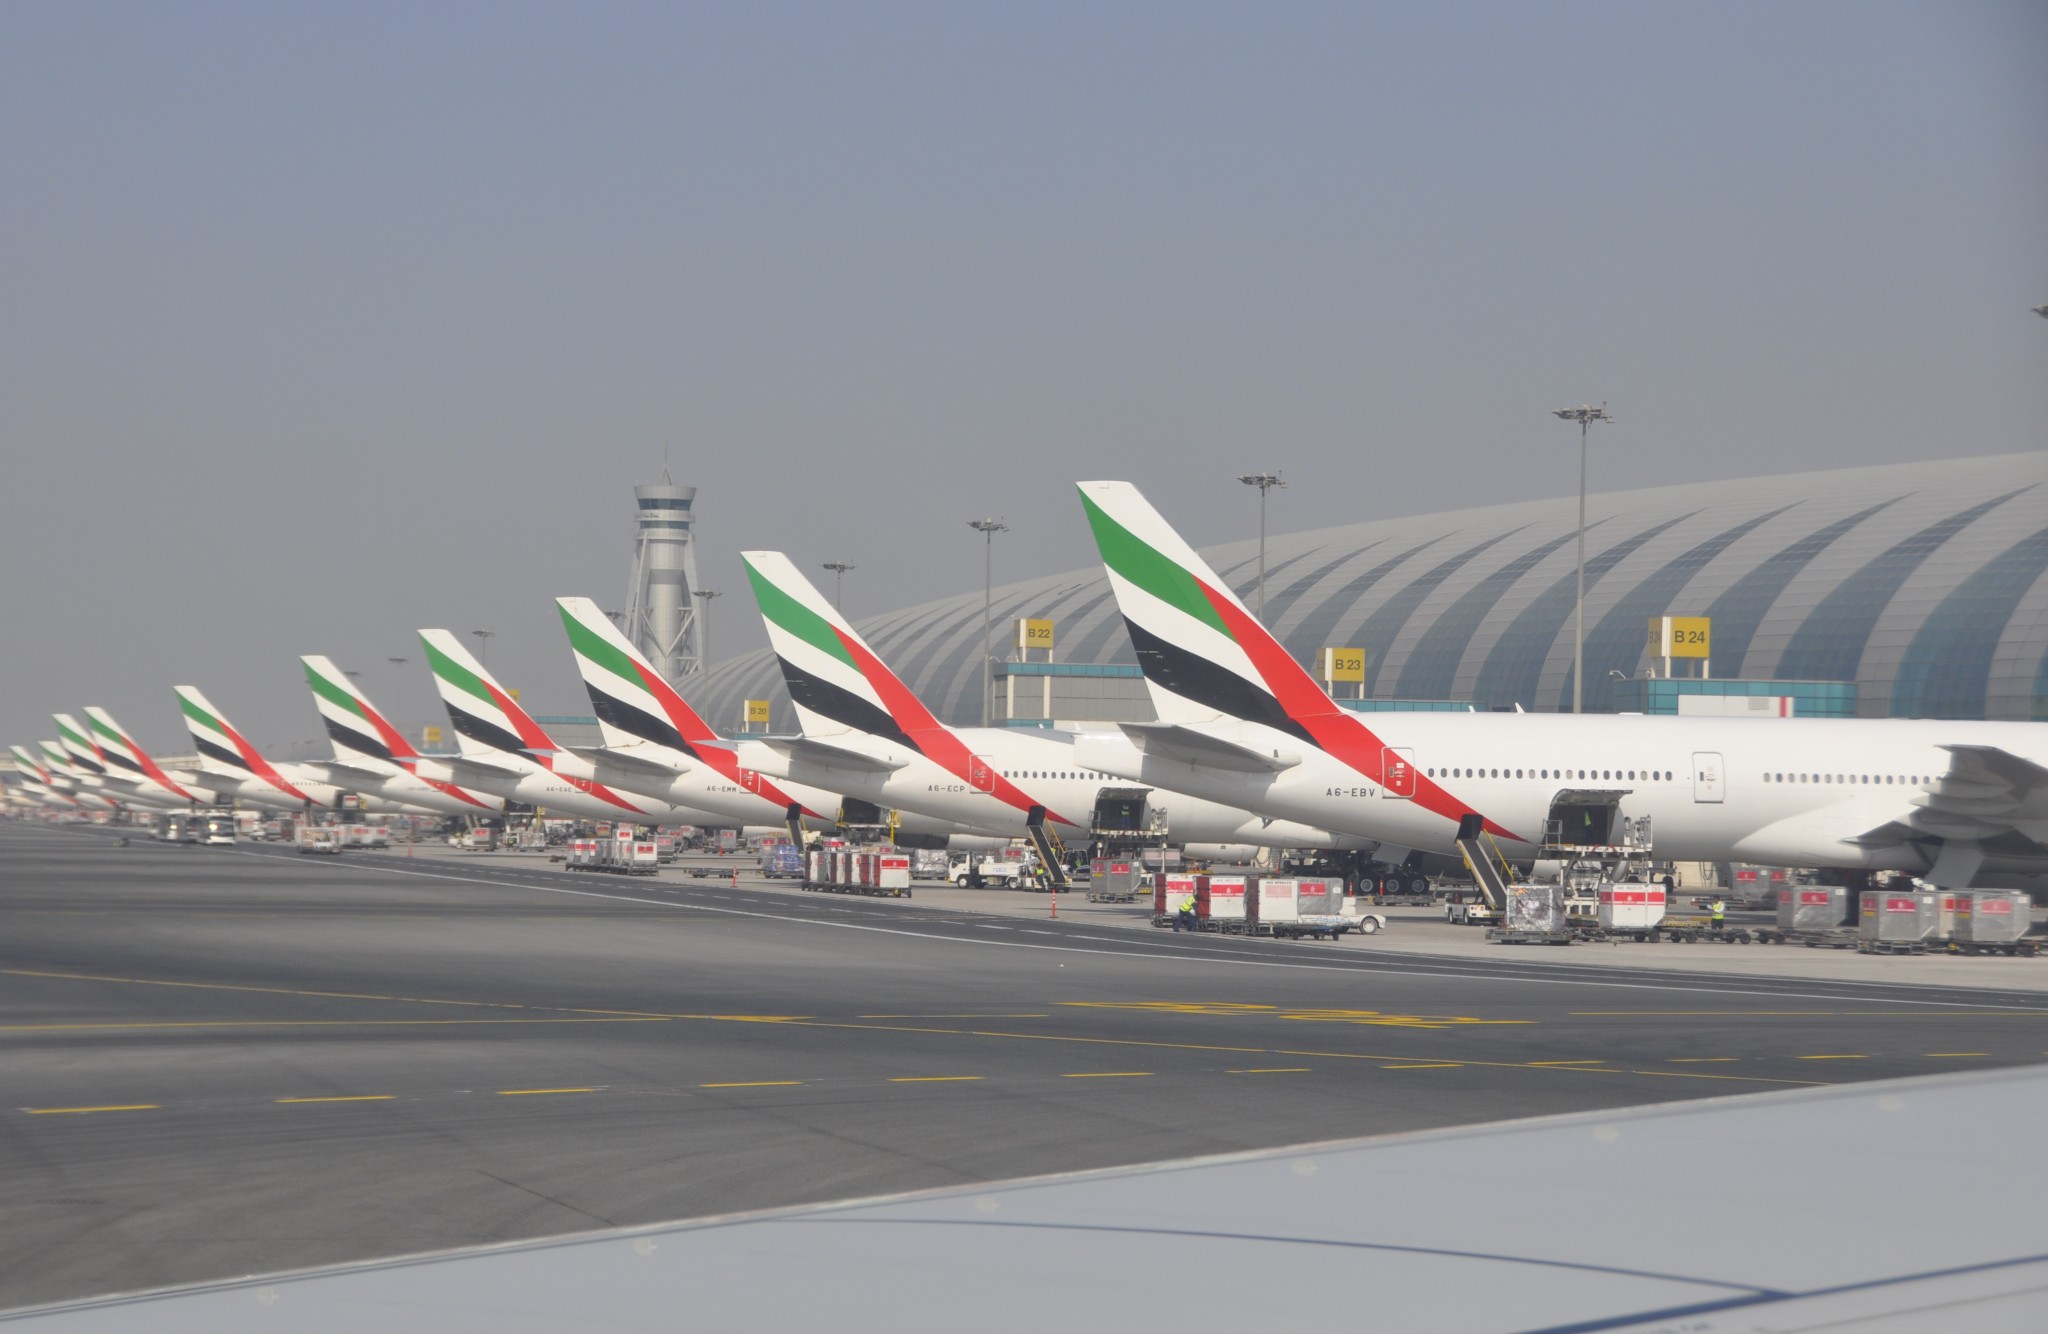 Emirates and Scoot aircraft impact